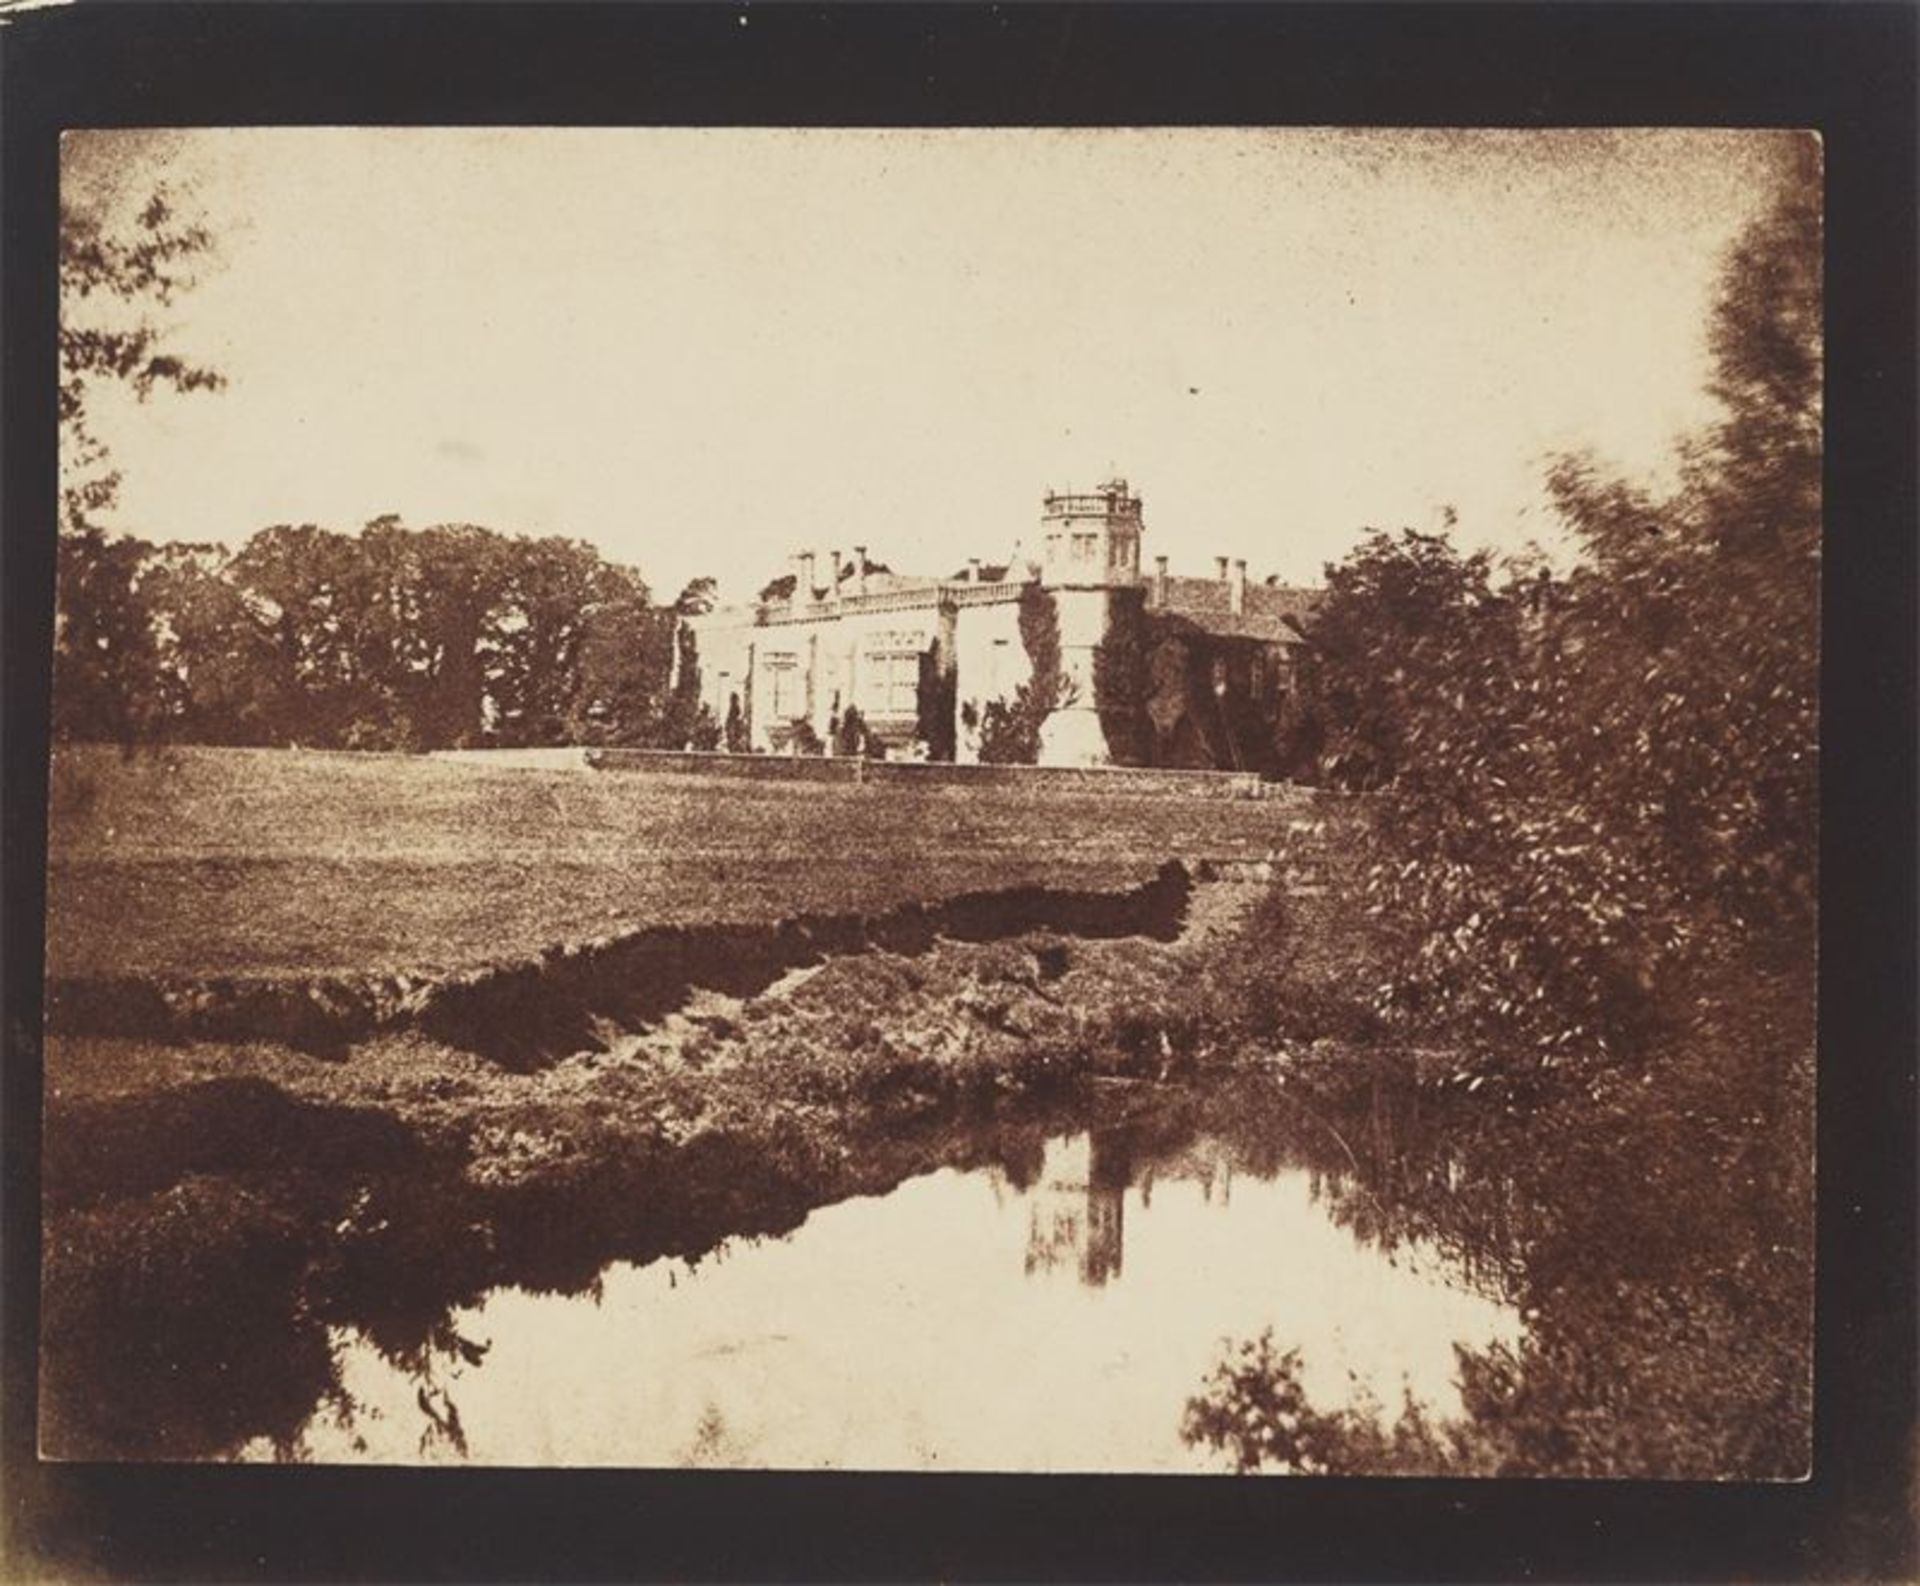 William Henry Fox Talbot (Melbury 1800 – 1877 Lacock Abbey)Lacock Abbey in Wiltshire.